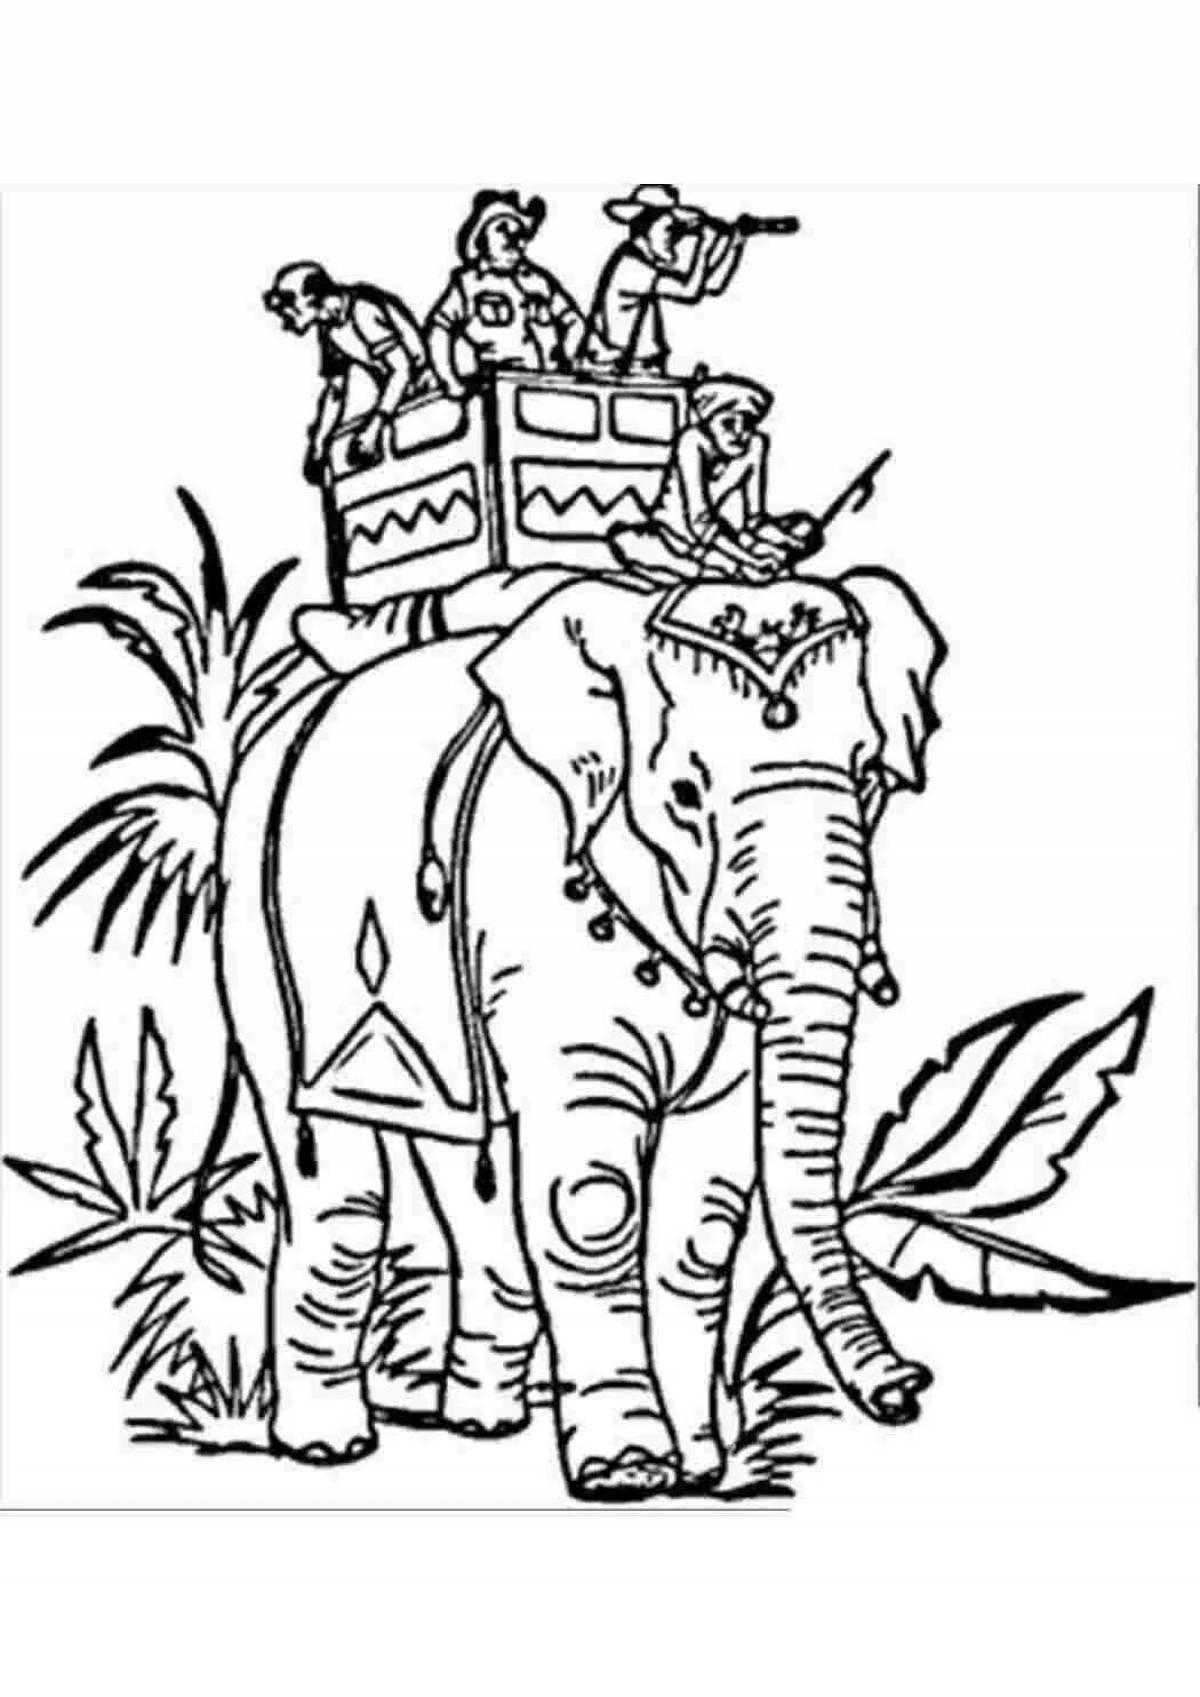 Indian elephant creative coloring for kids